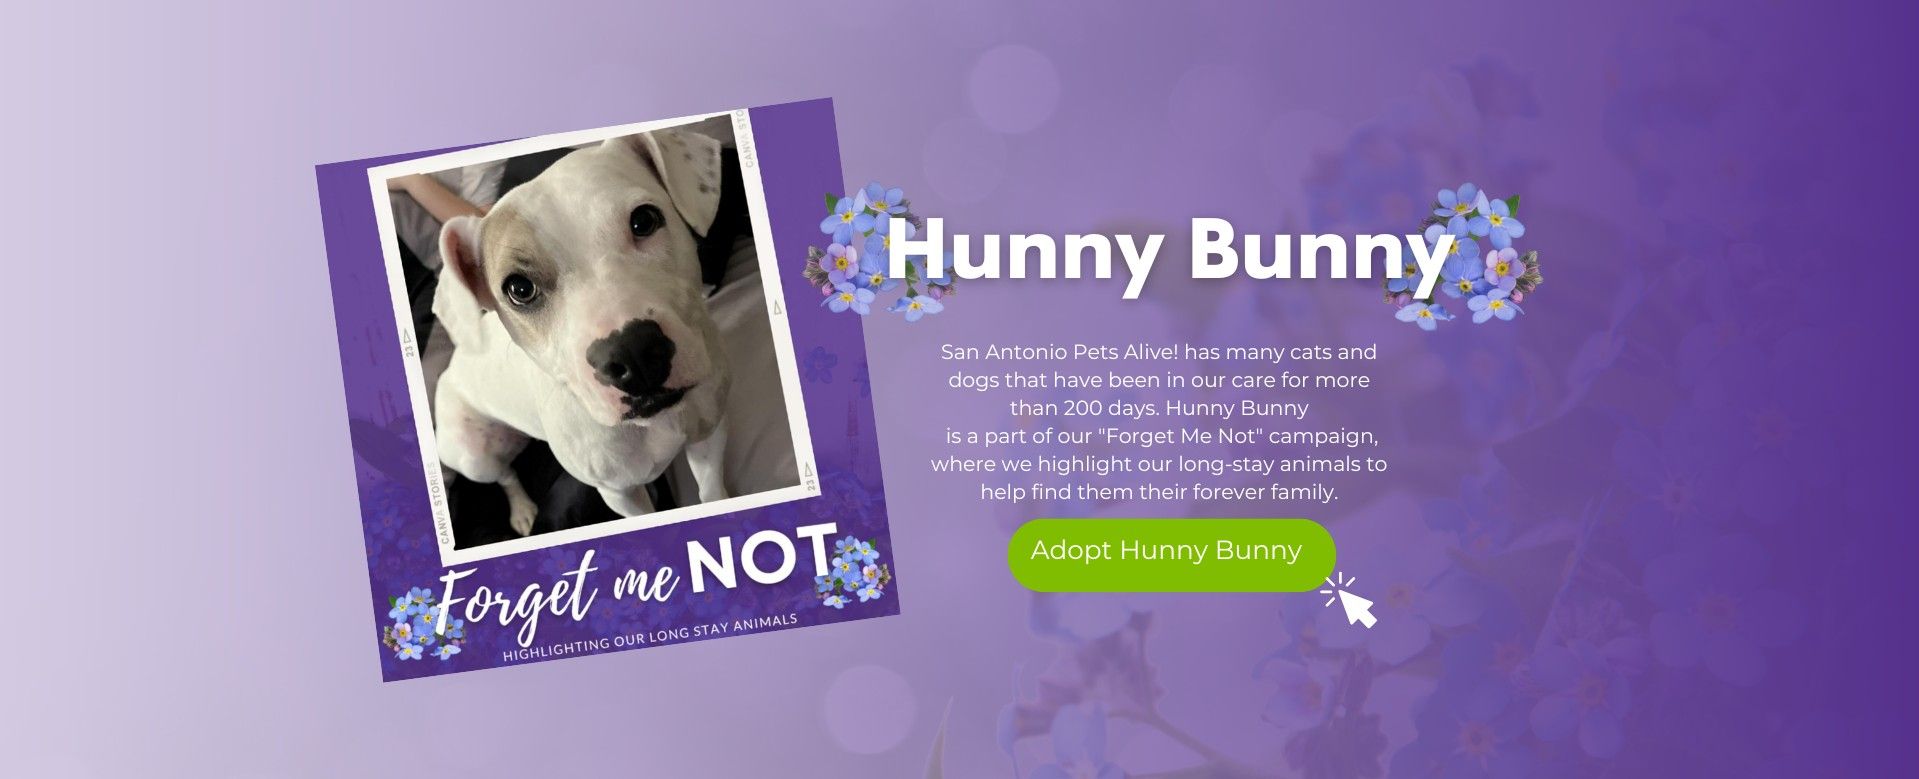 Forget Me Not - Adopt Hunny Bunny